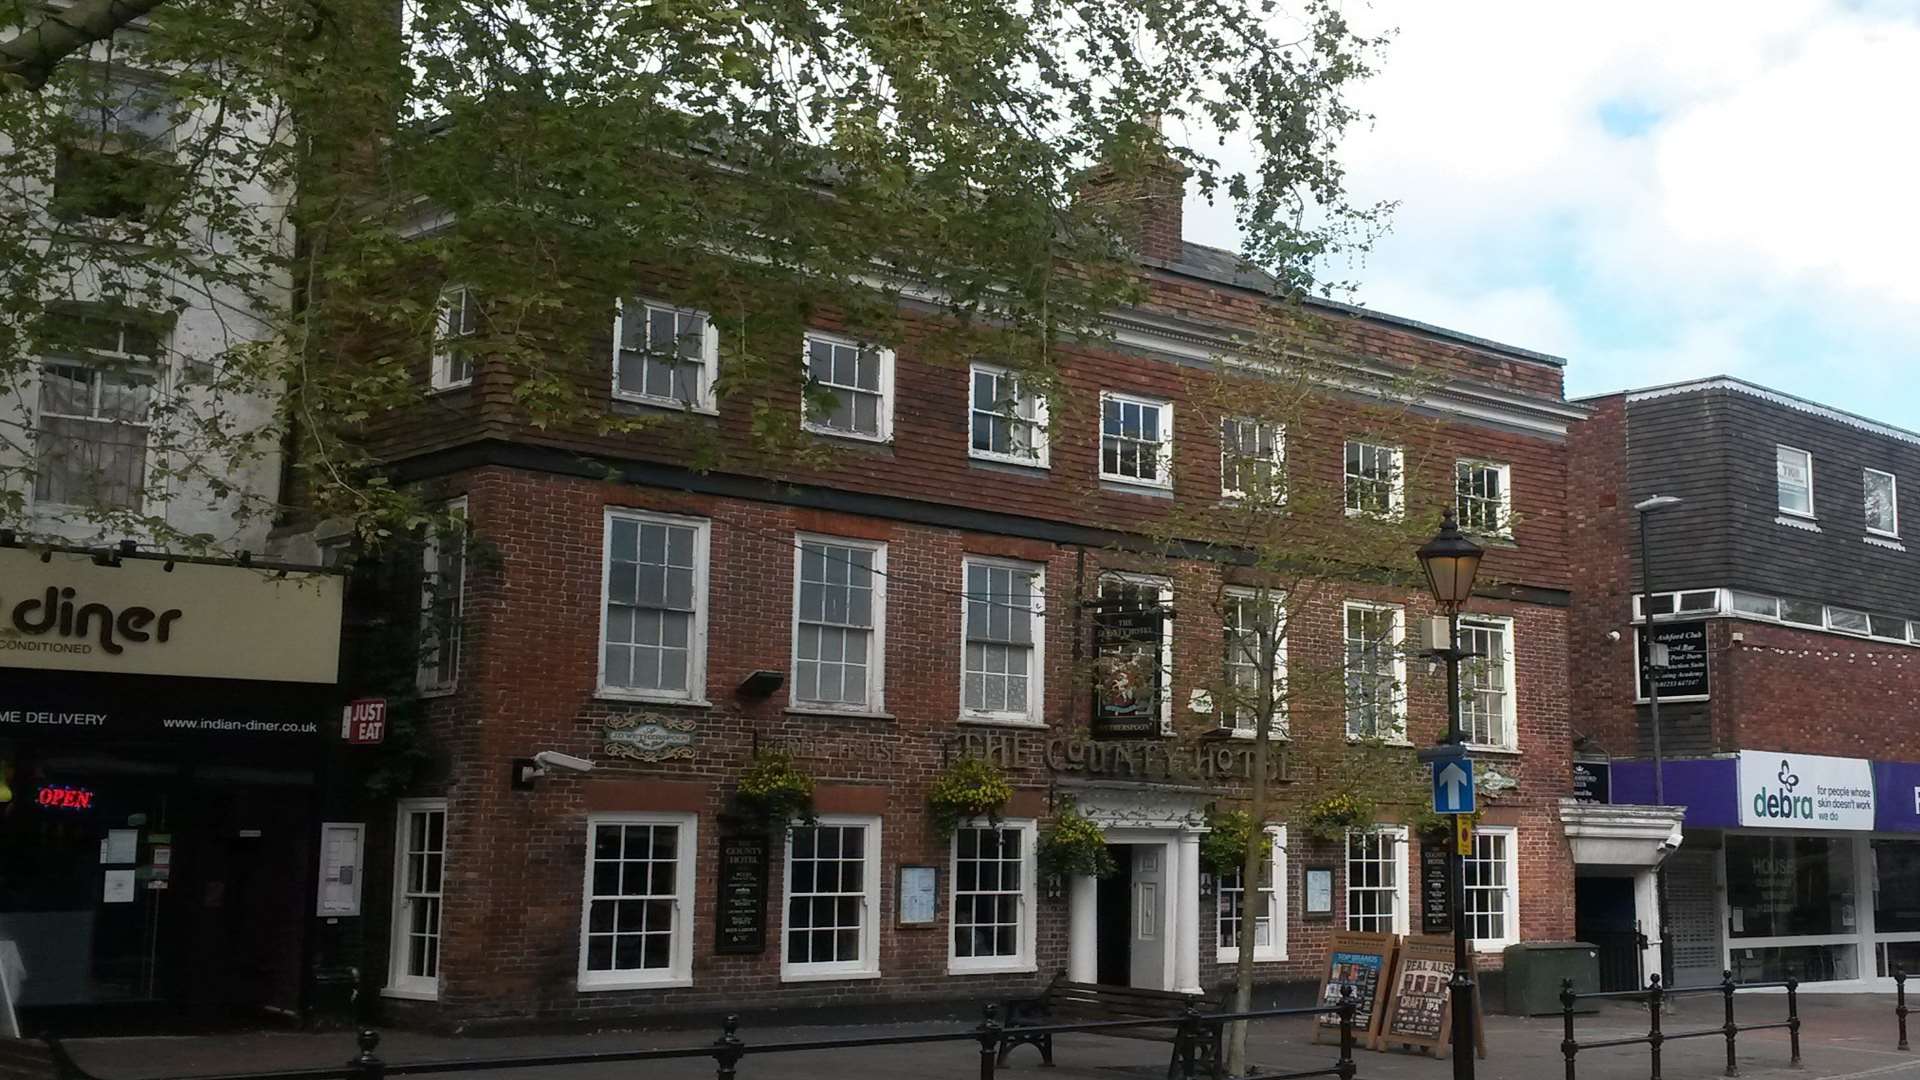 The County Hotel in Ashford town centre